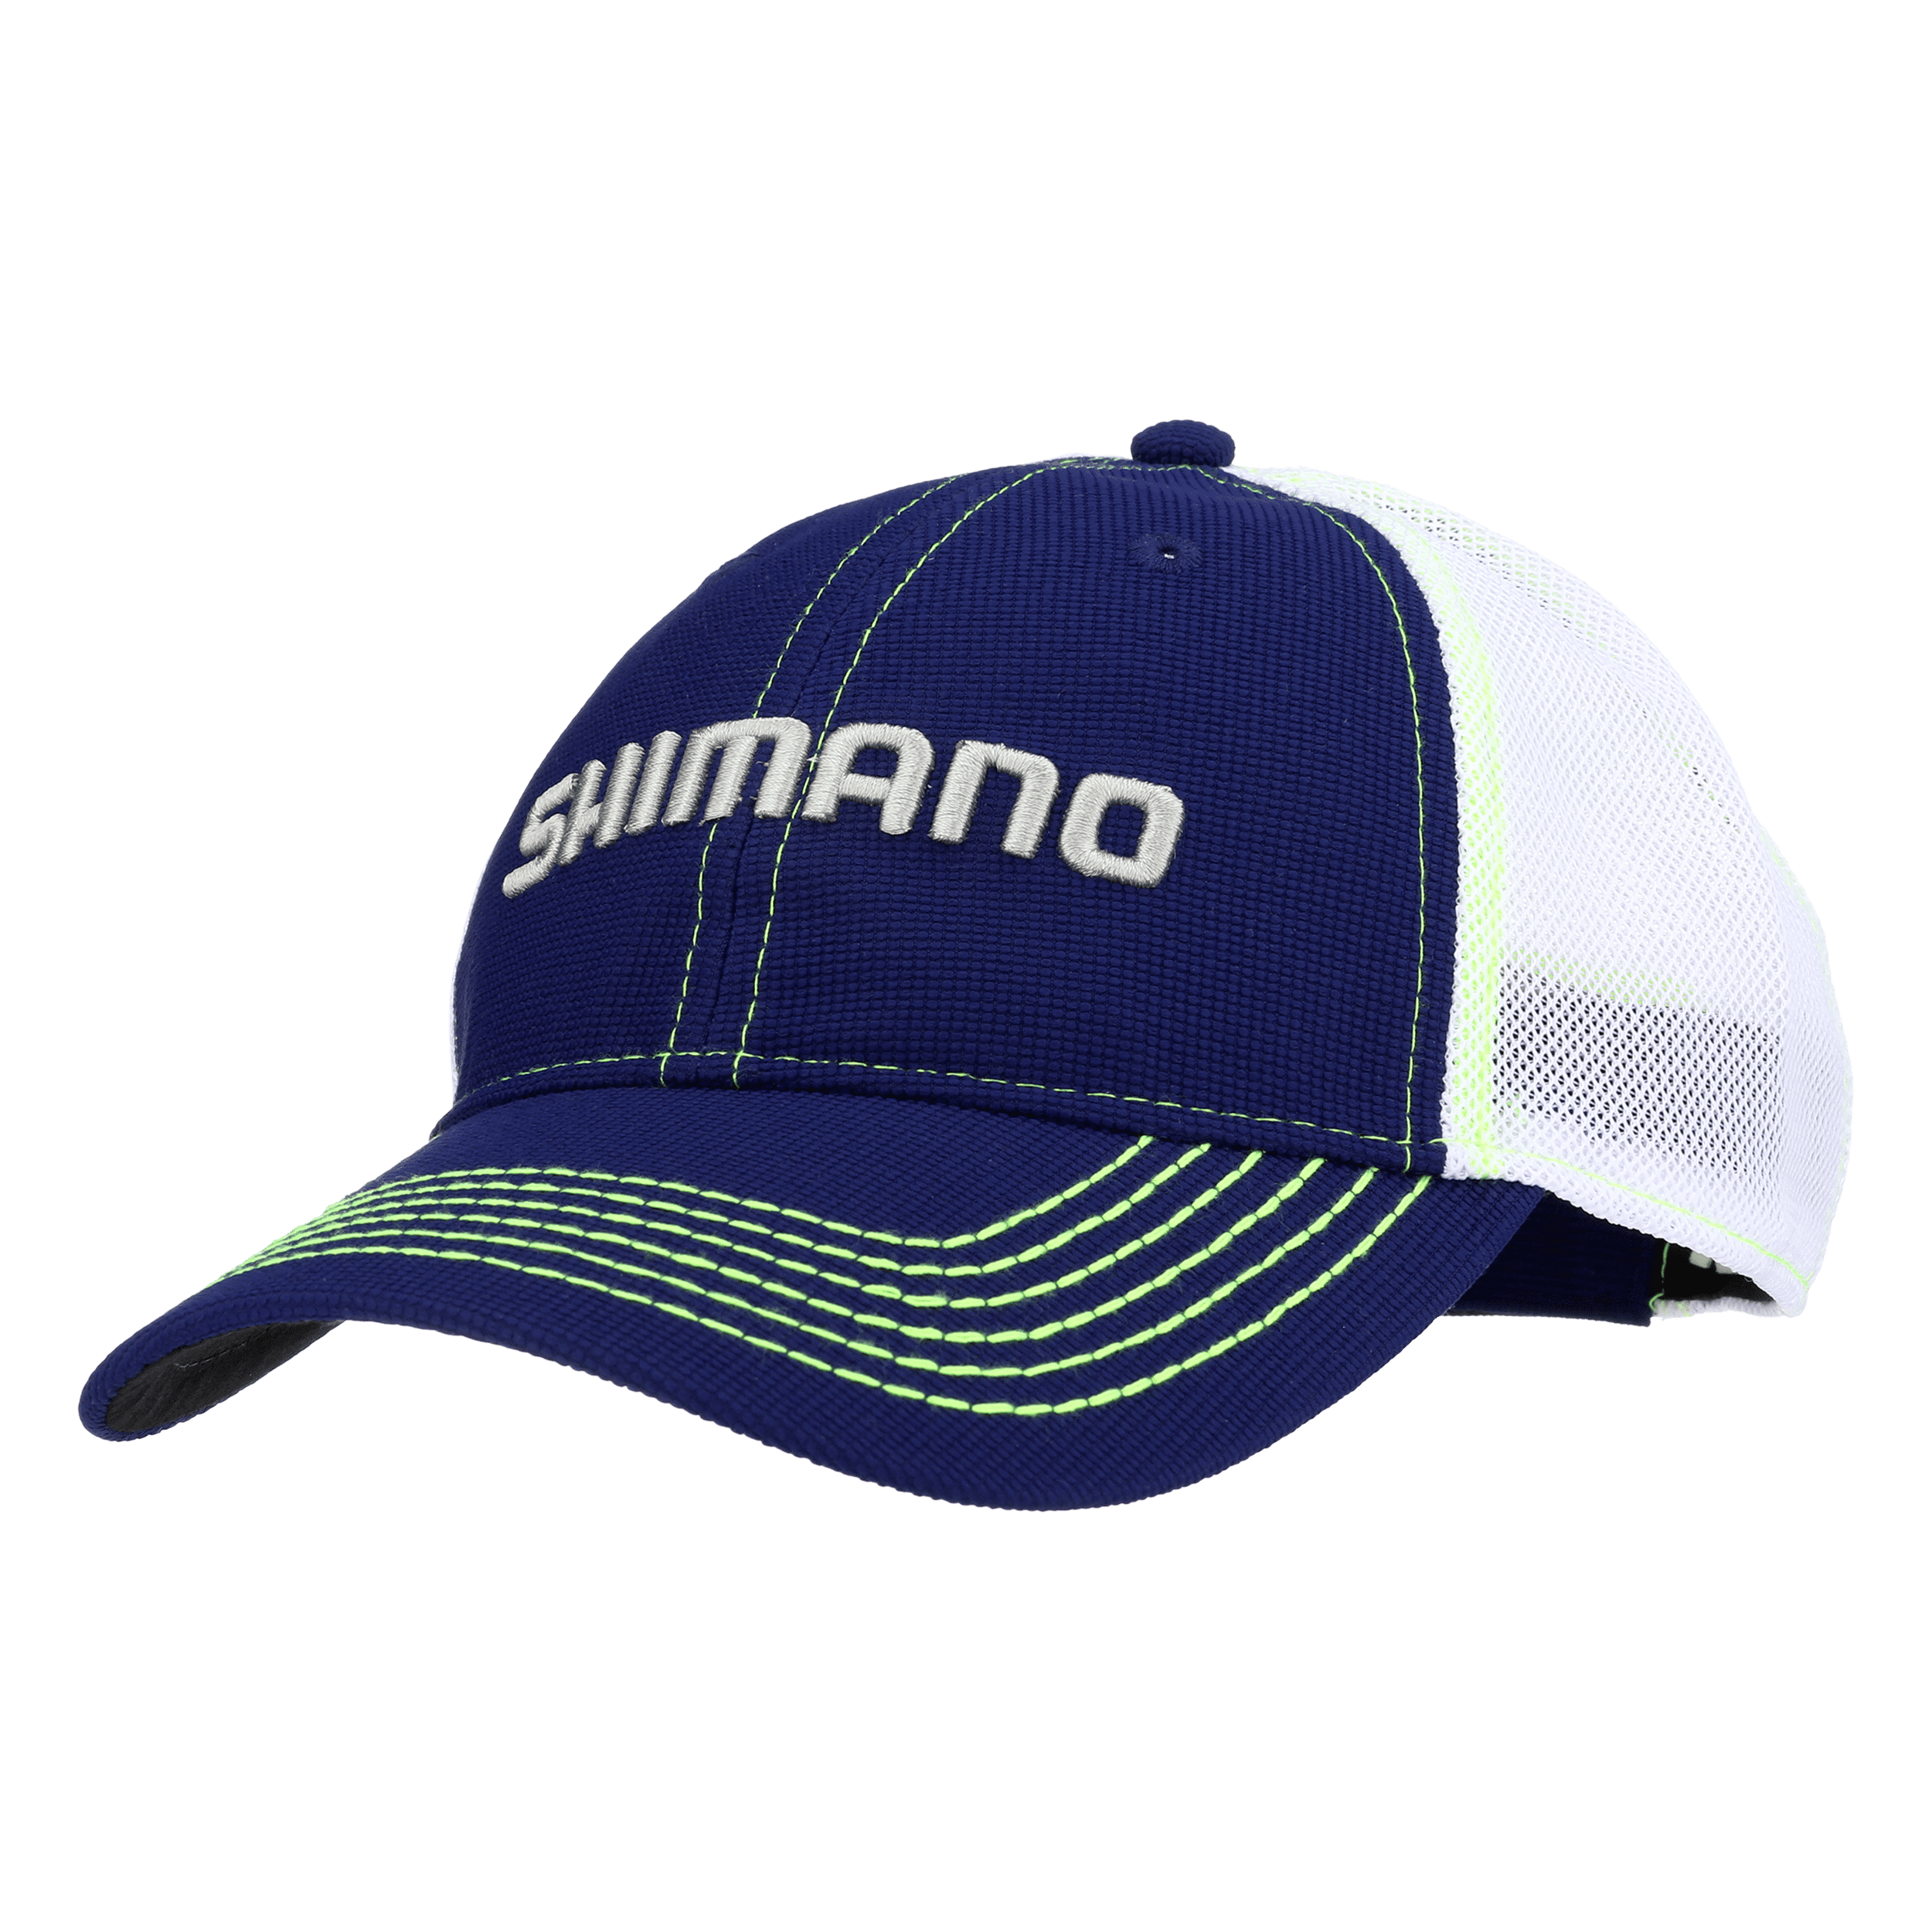 Shimano Fishing Fishing Line Cap - Black, One Size Fits Most